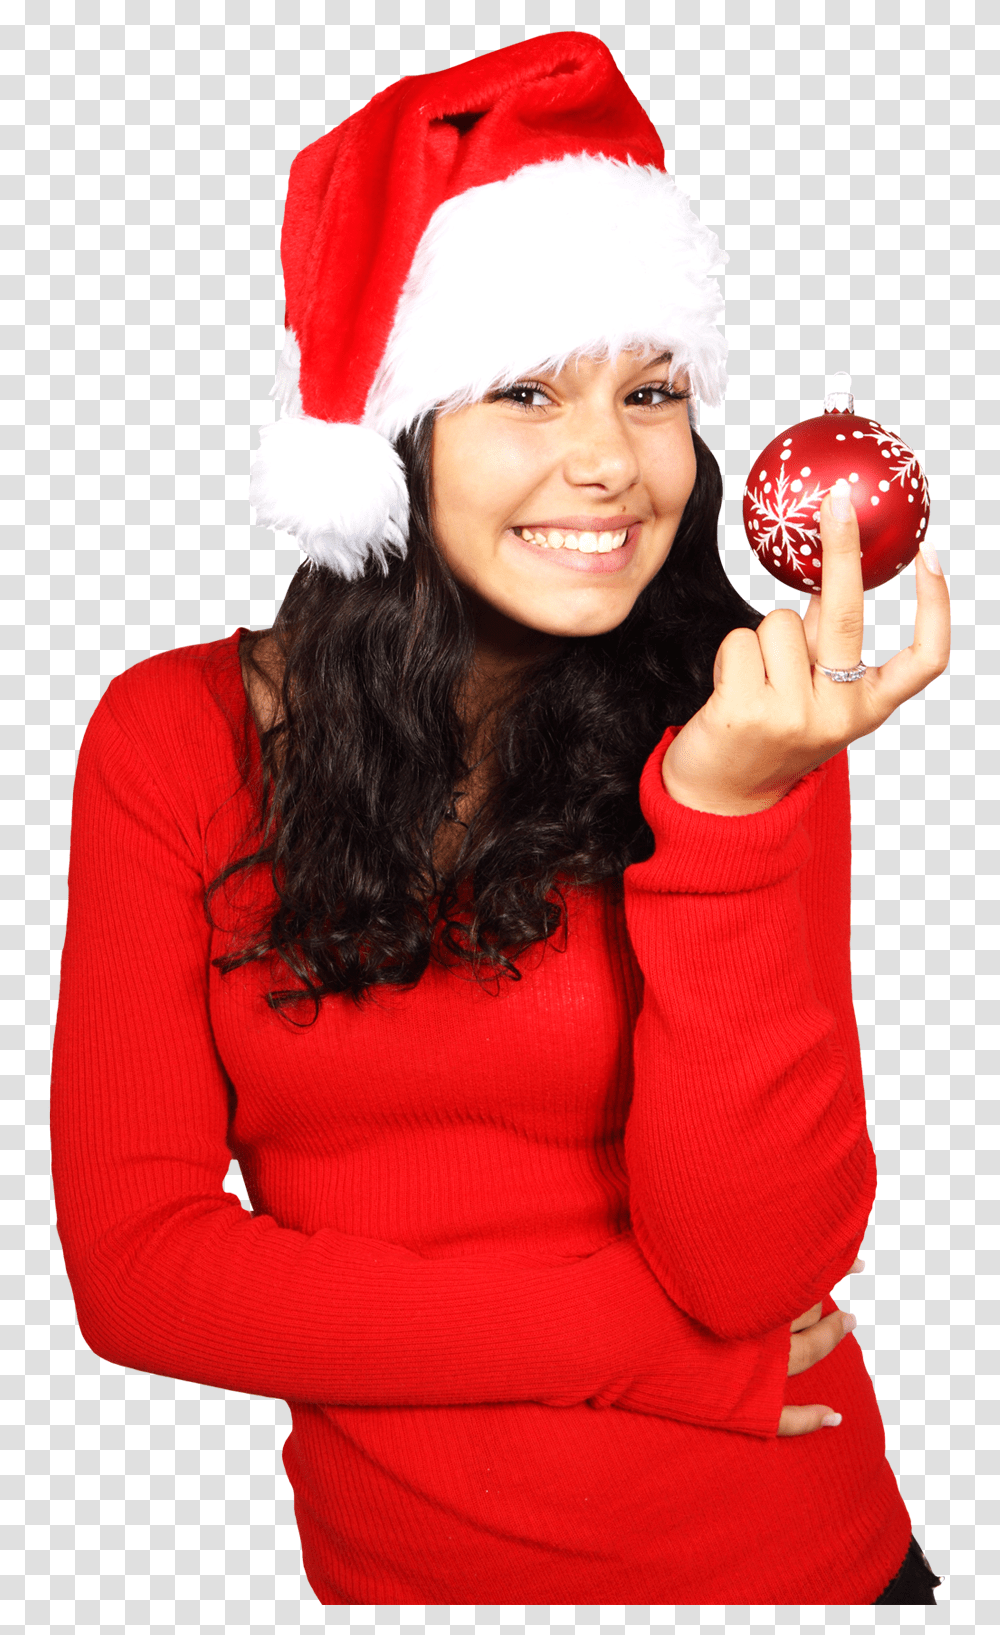 Attractive Young Woman Holding Christmas Ball Image Pngpix Santa Claus Girl, Person, Clothing, Sphere, Costume Transparent Png